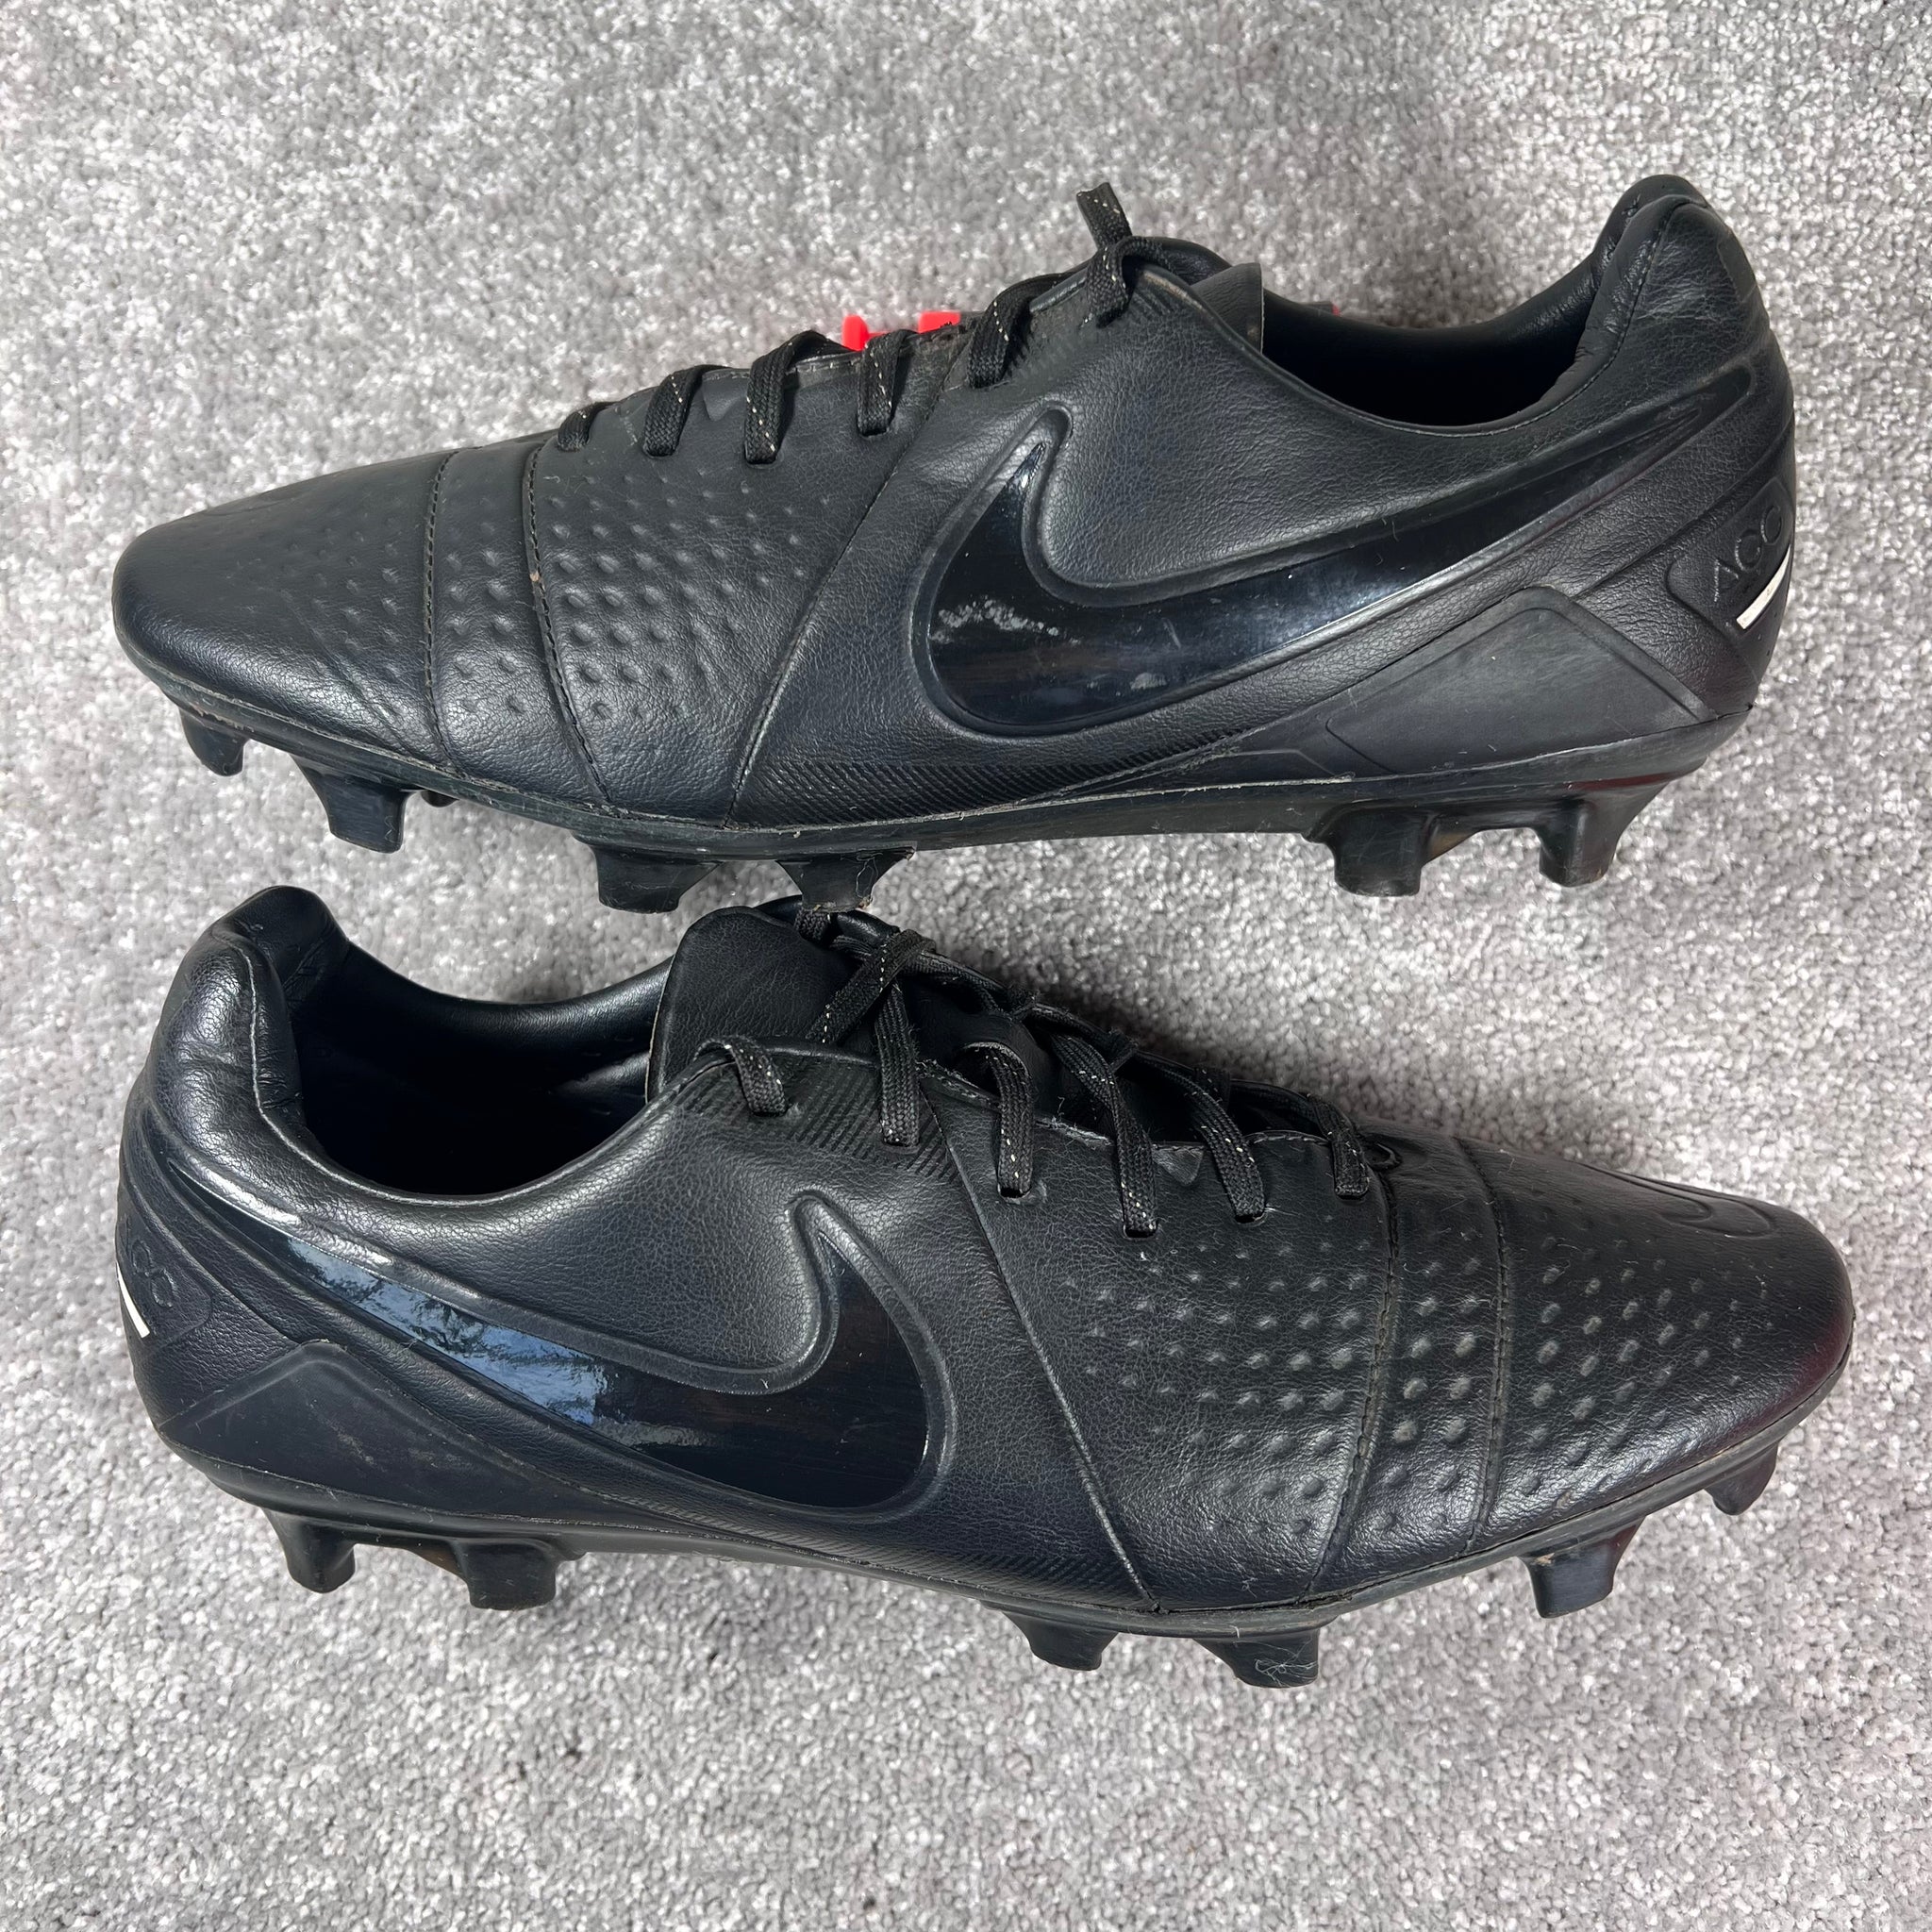 ctr360 lights out for sale